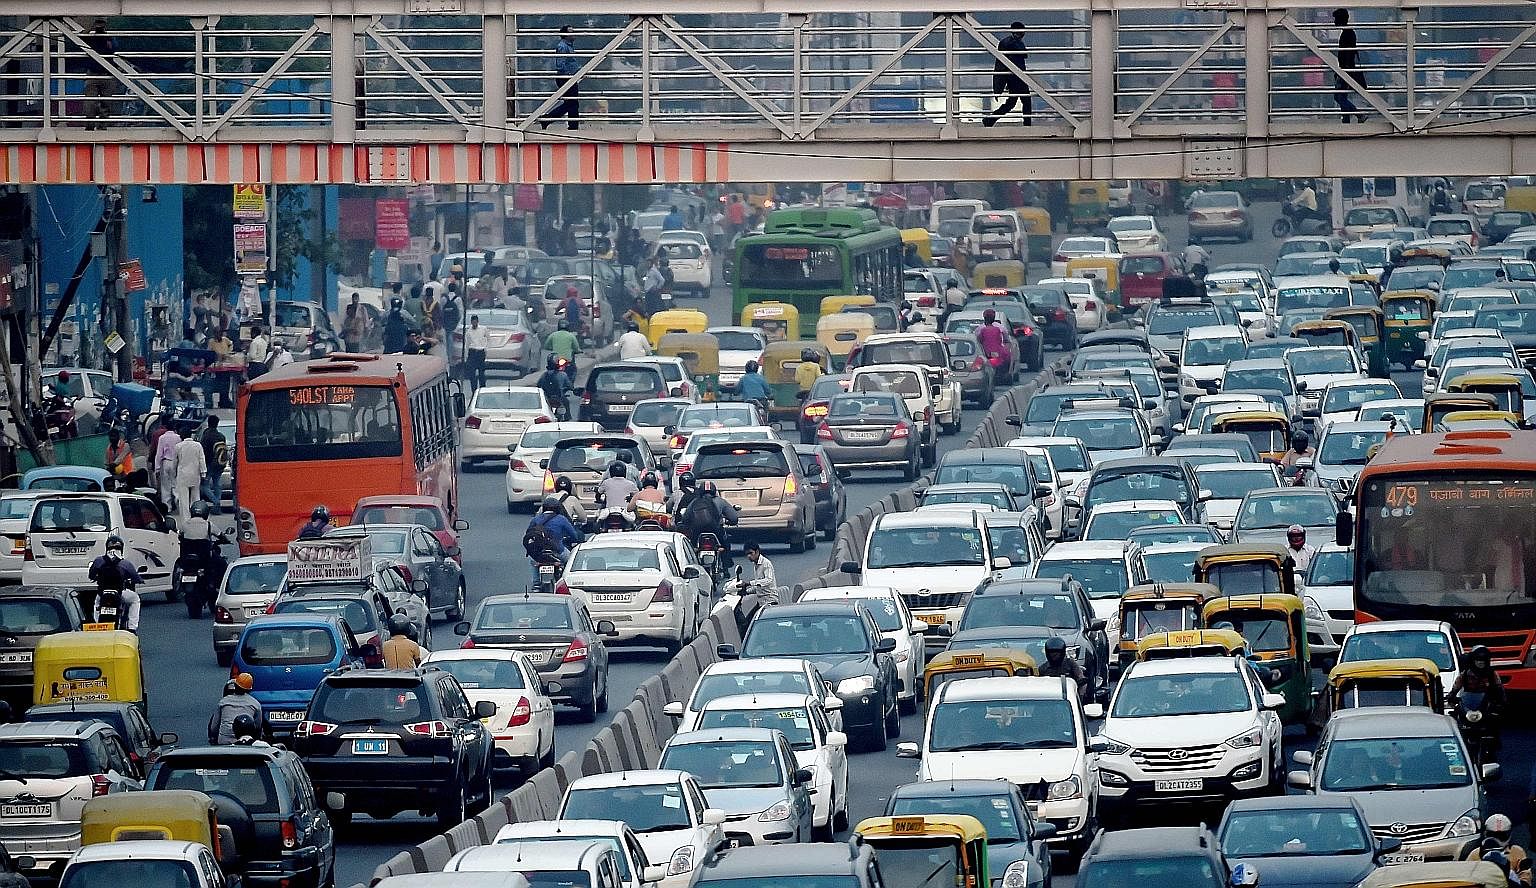 Nations like India, whose cities are beset by slums, yearn for a prosperous urban future. But getting there will require major governance and policy changes. This is because their cities, such as India's New Delhi (above), are places where traffic cr